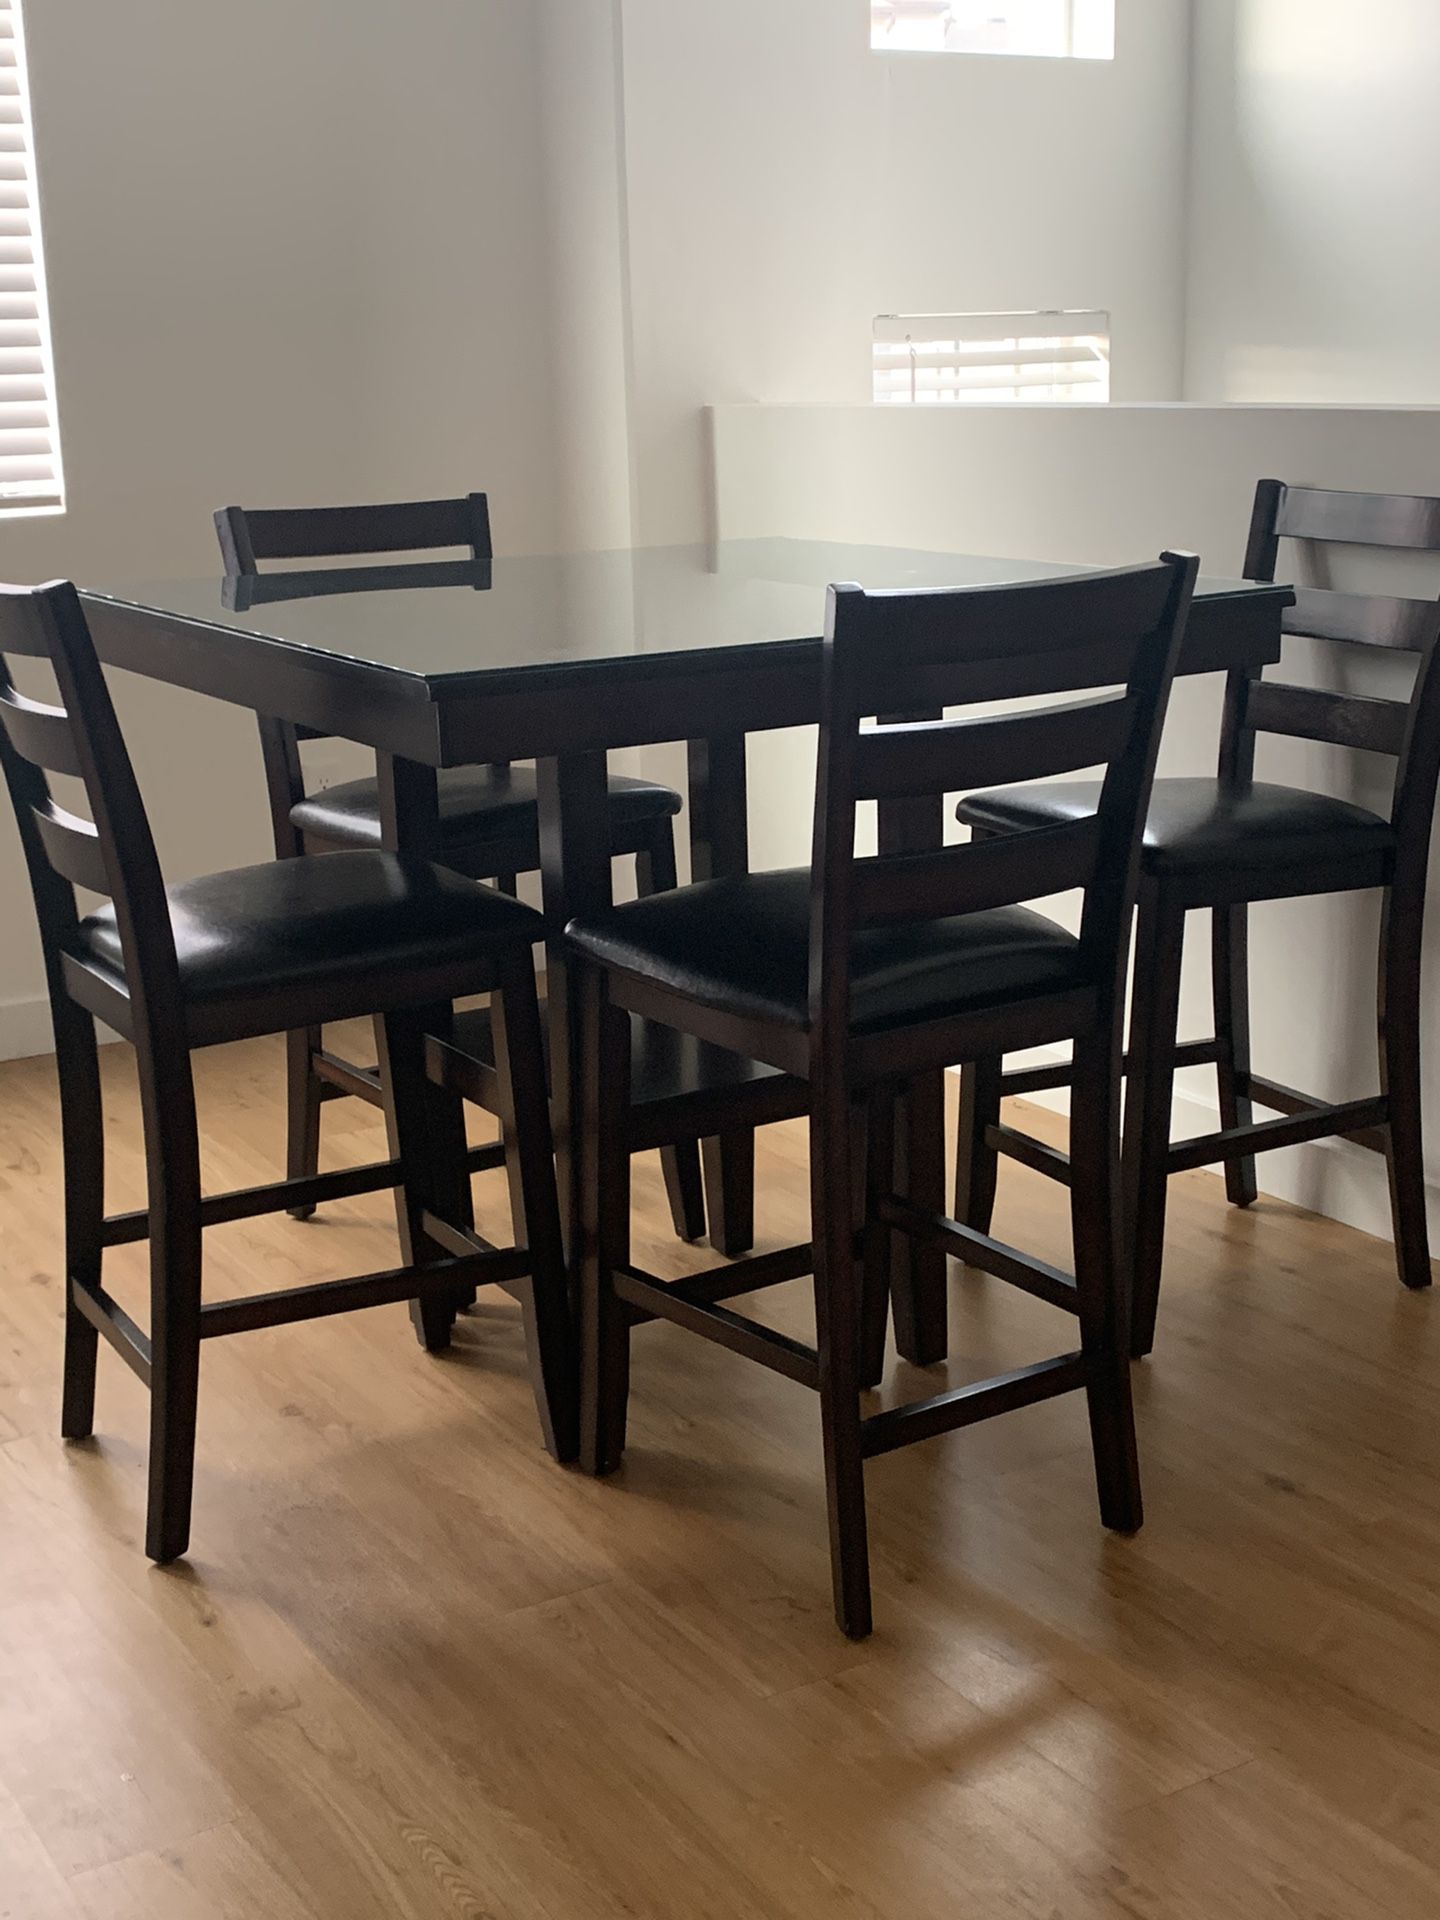 Brown wood dining table with top glass & 4 chairs